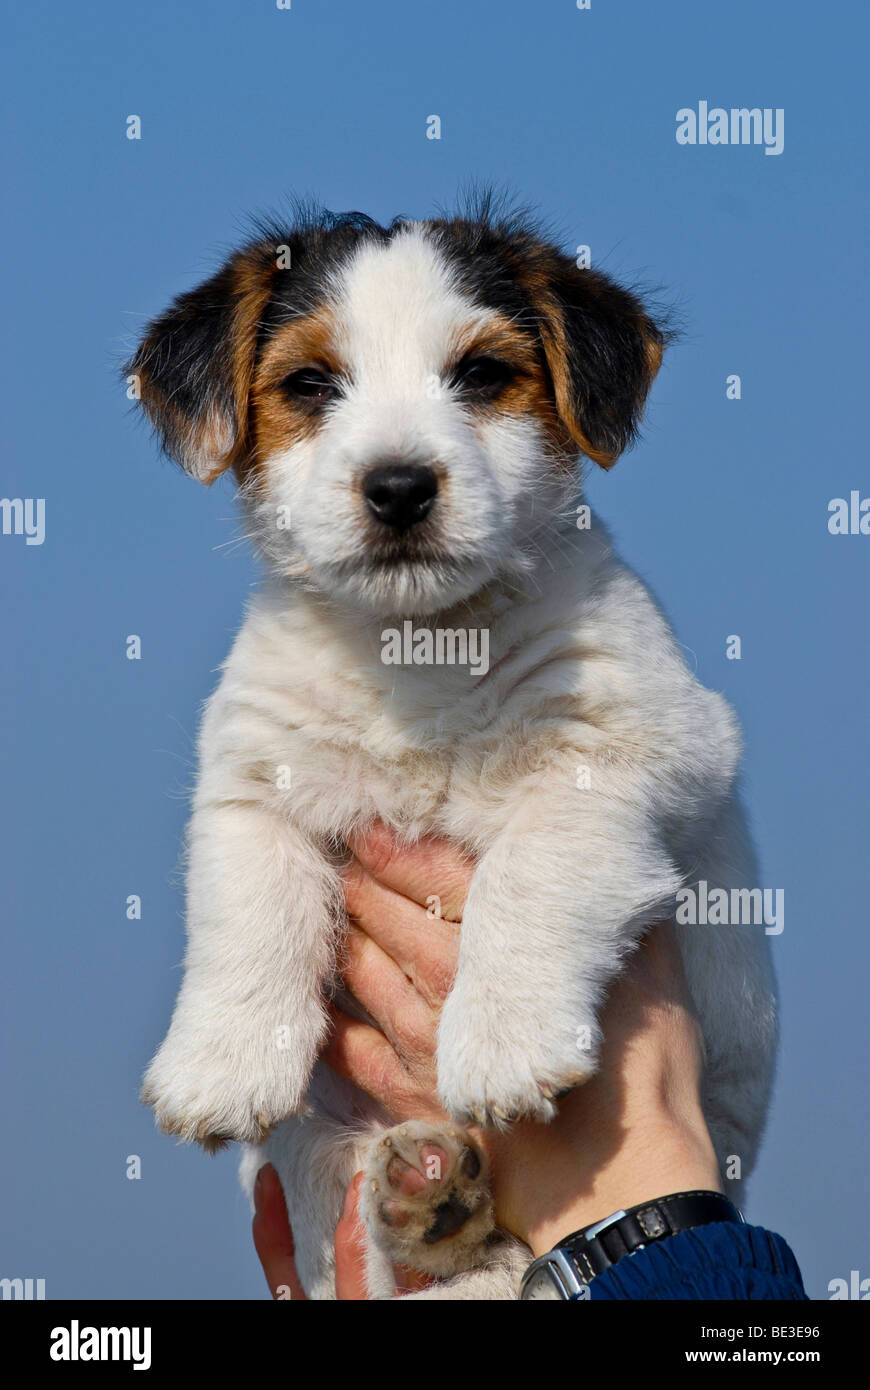 Jack Russell Terrier being held up by hands Stock Photo